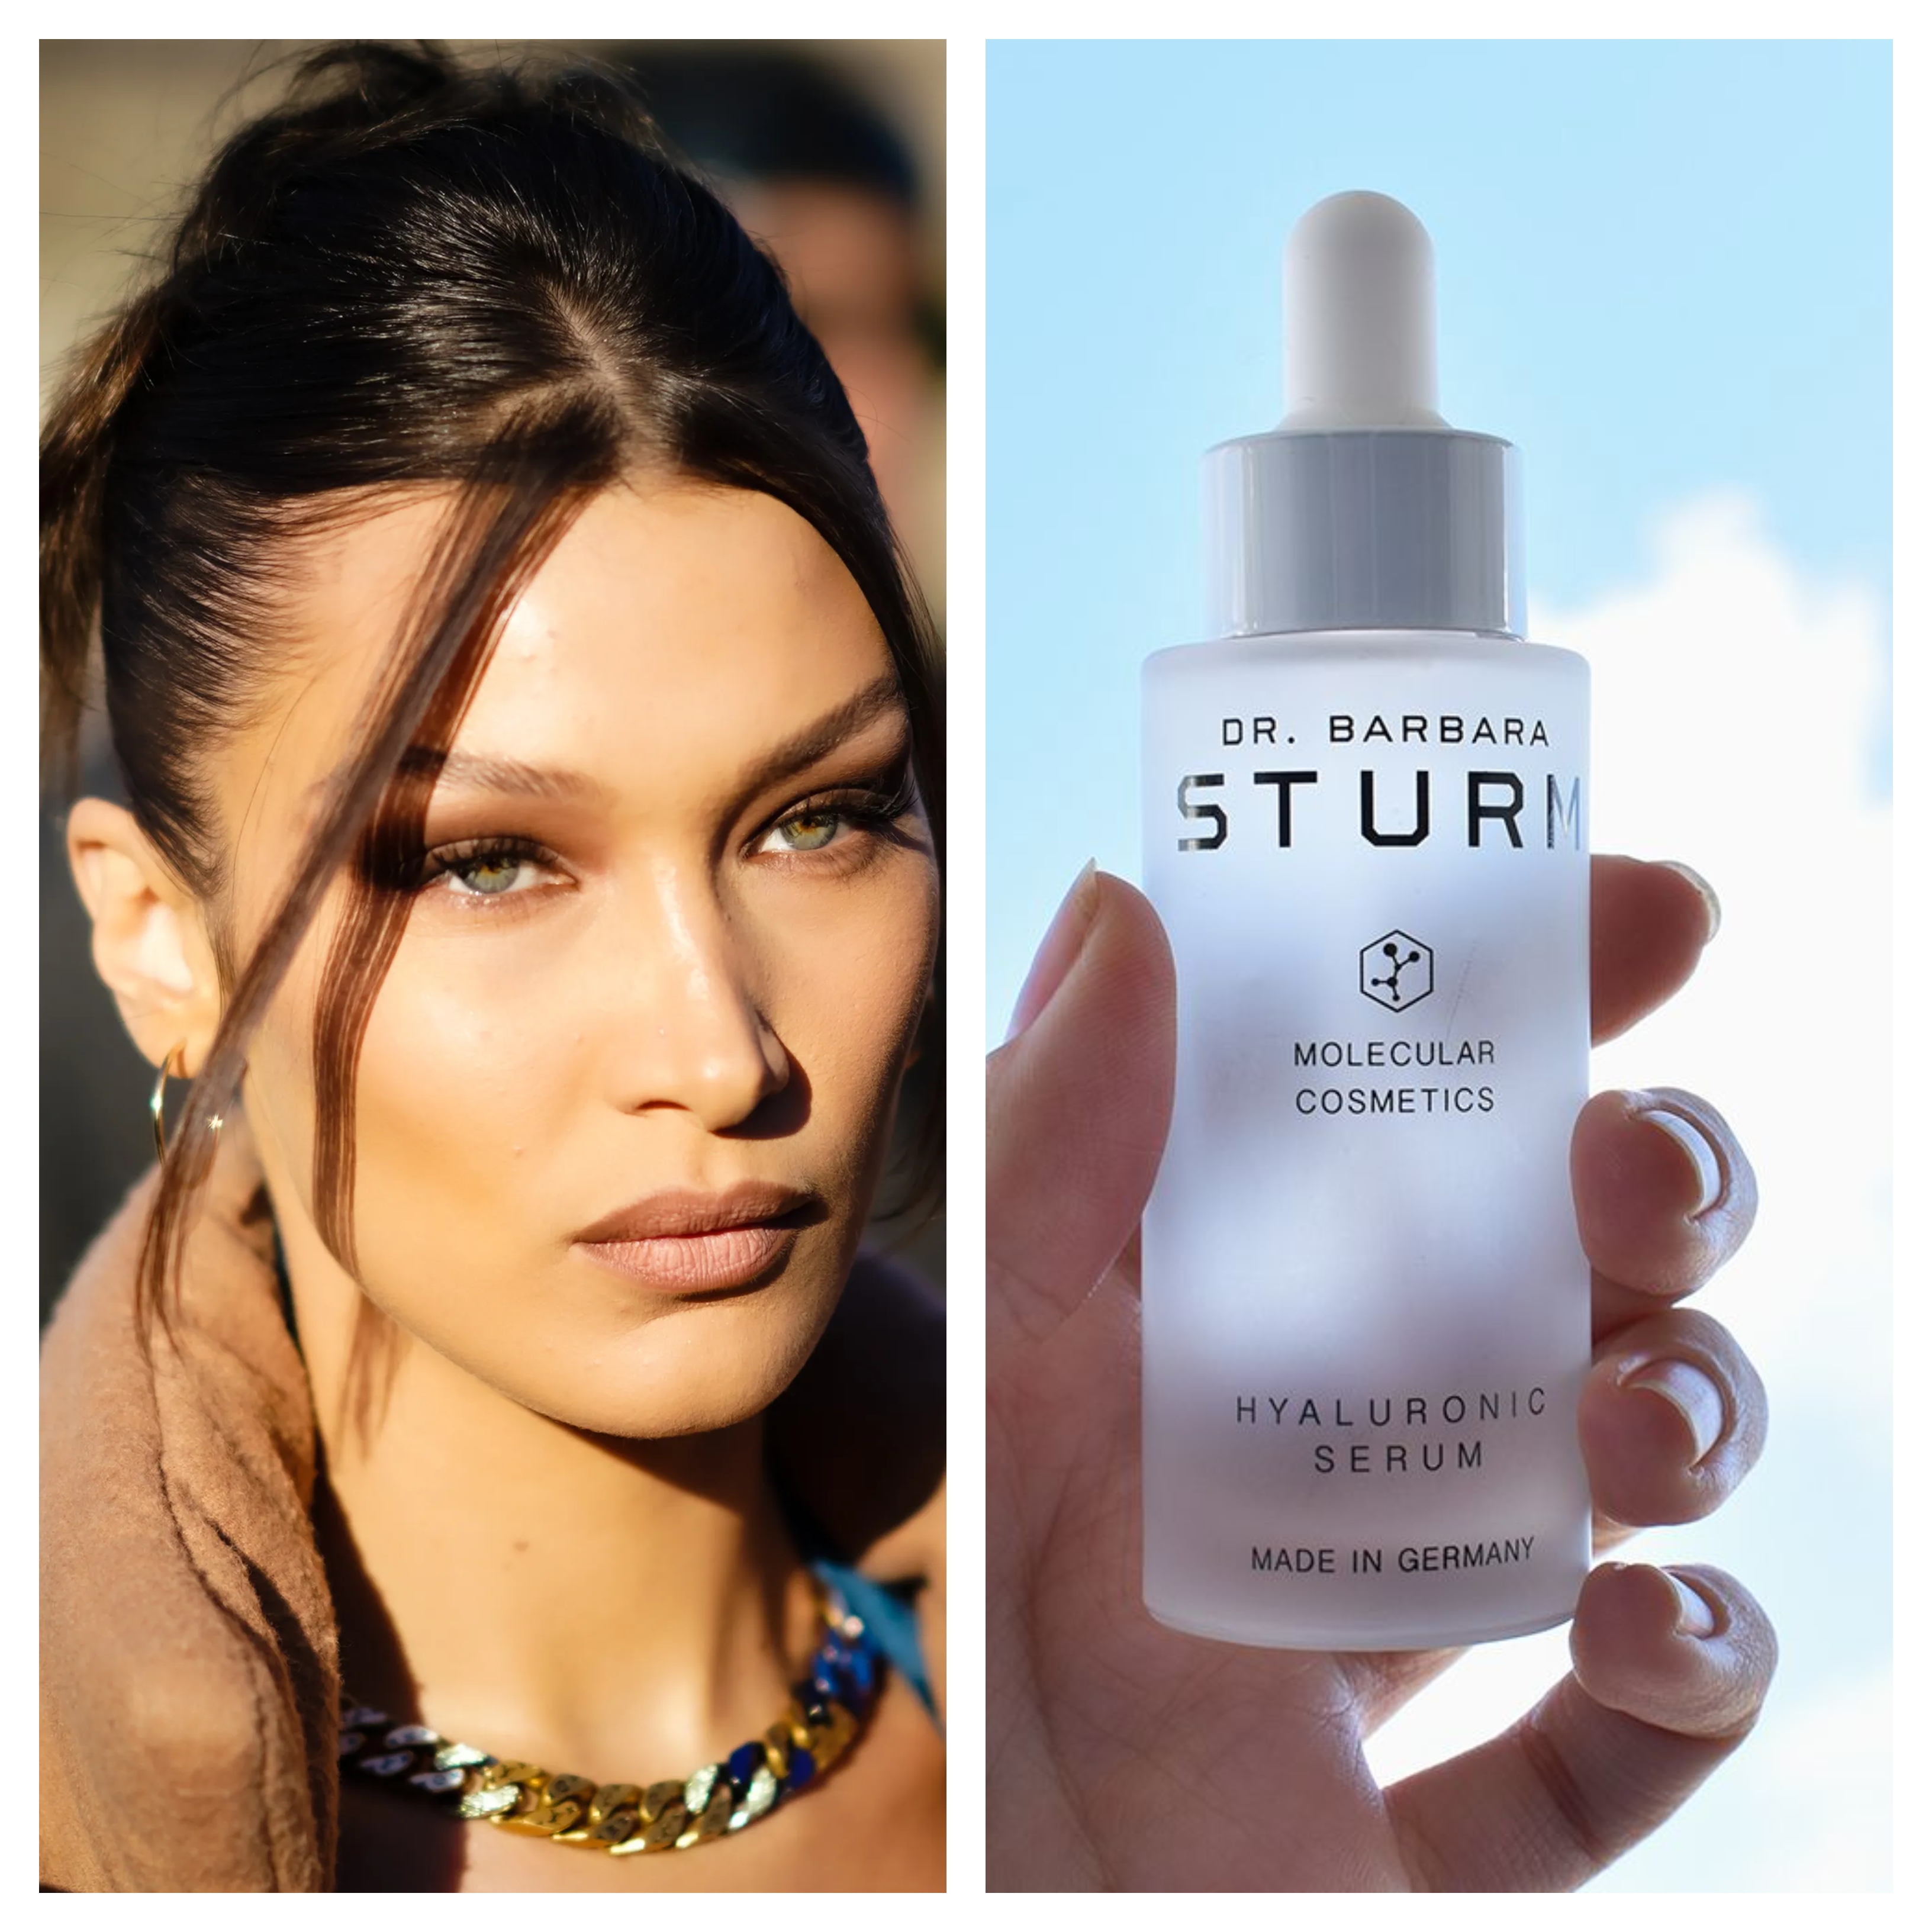 Collage of Bella Hadid and Dr. Barbara Sturm's Hyaluronic Serum